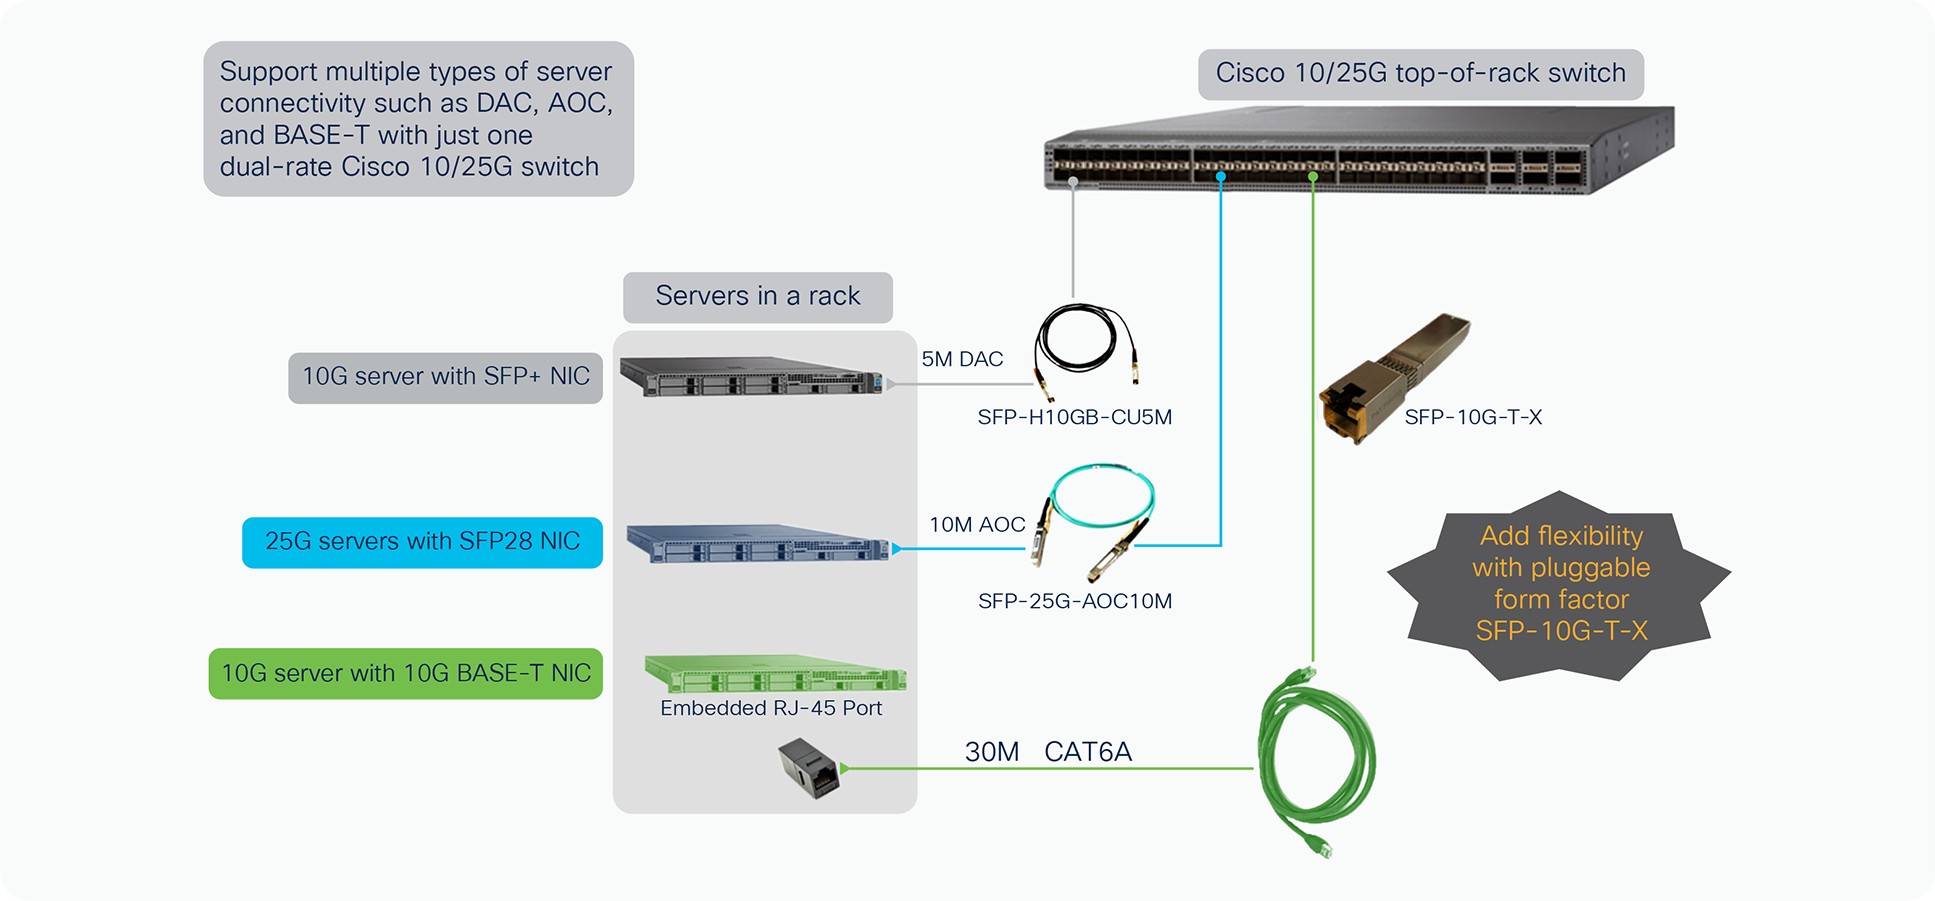 Enabling a variety of connectivity options to Cisco 10G and dual-rate 10/25G switches/routers